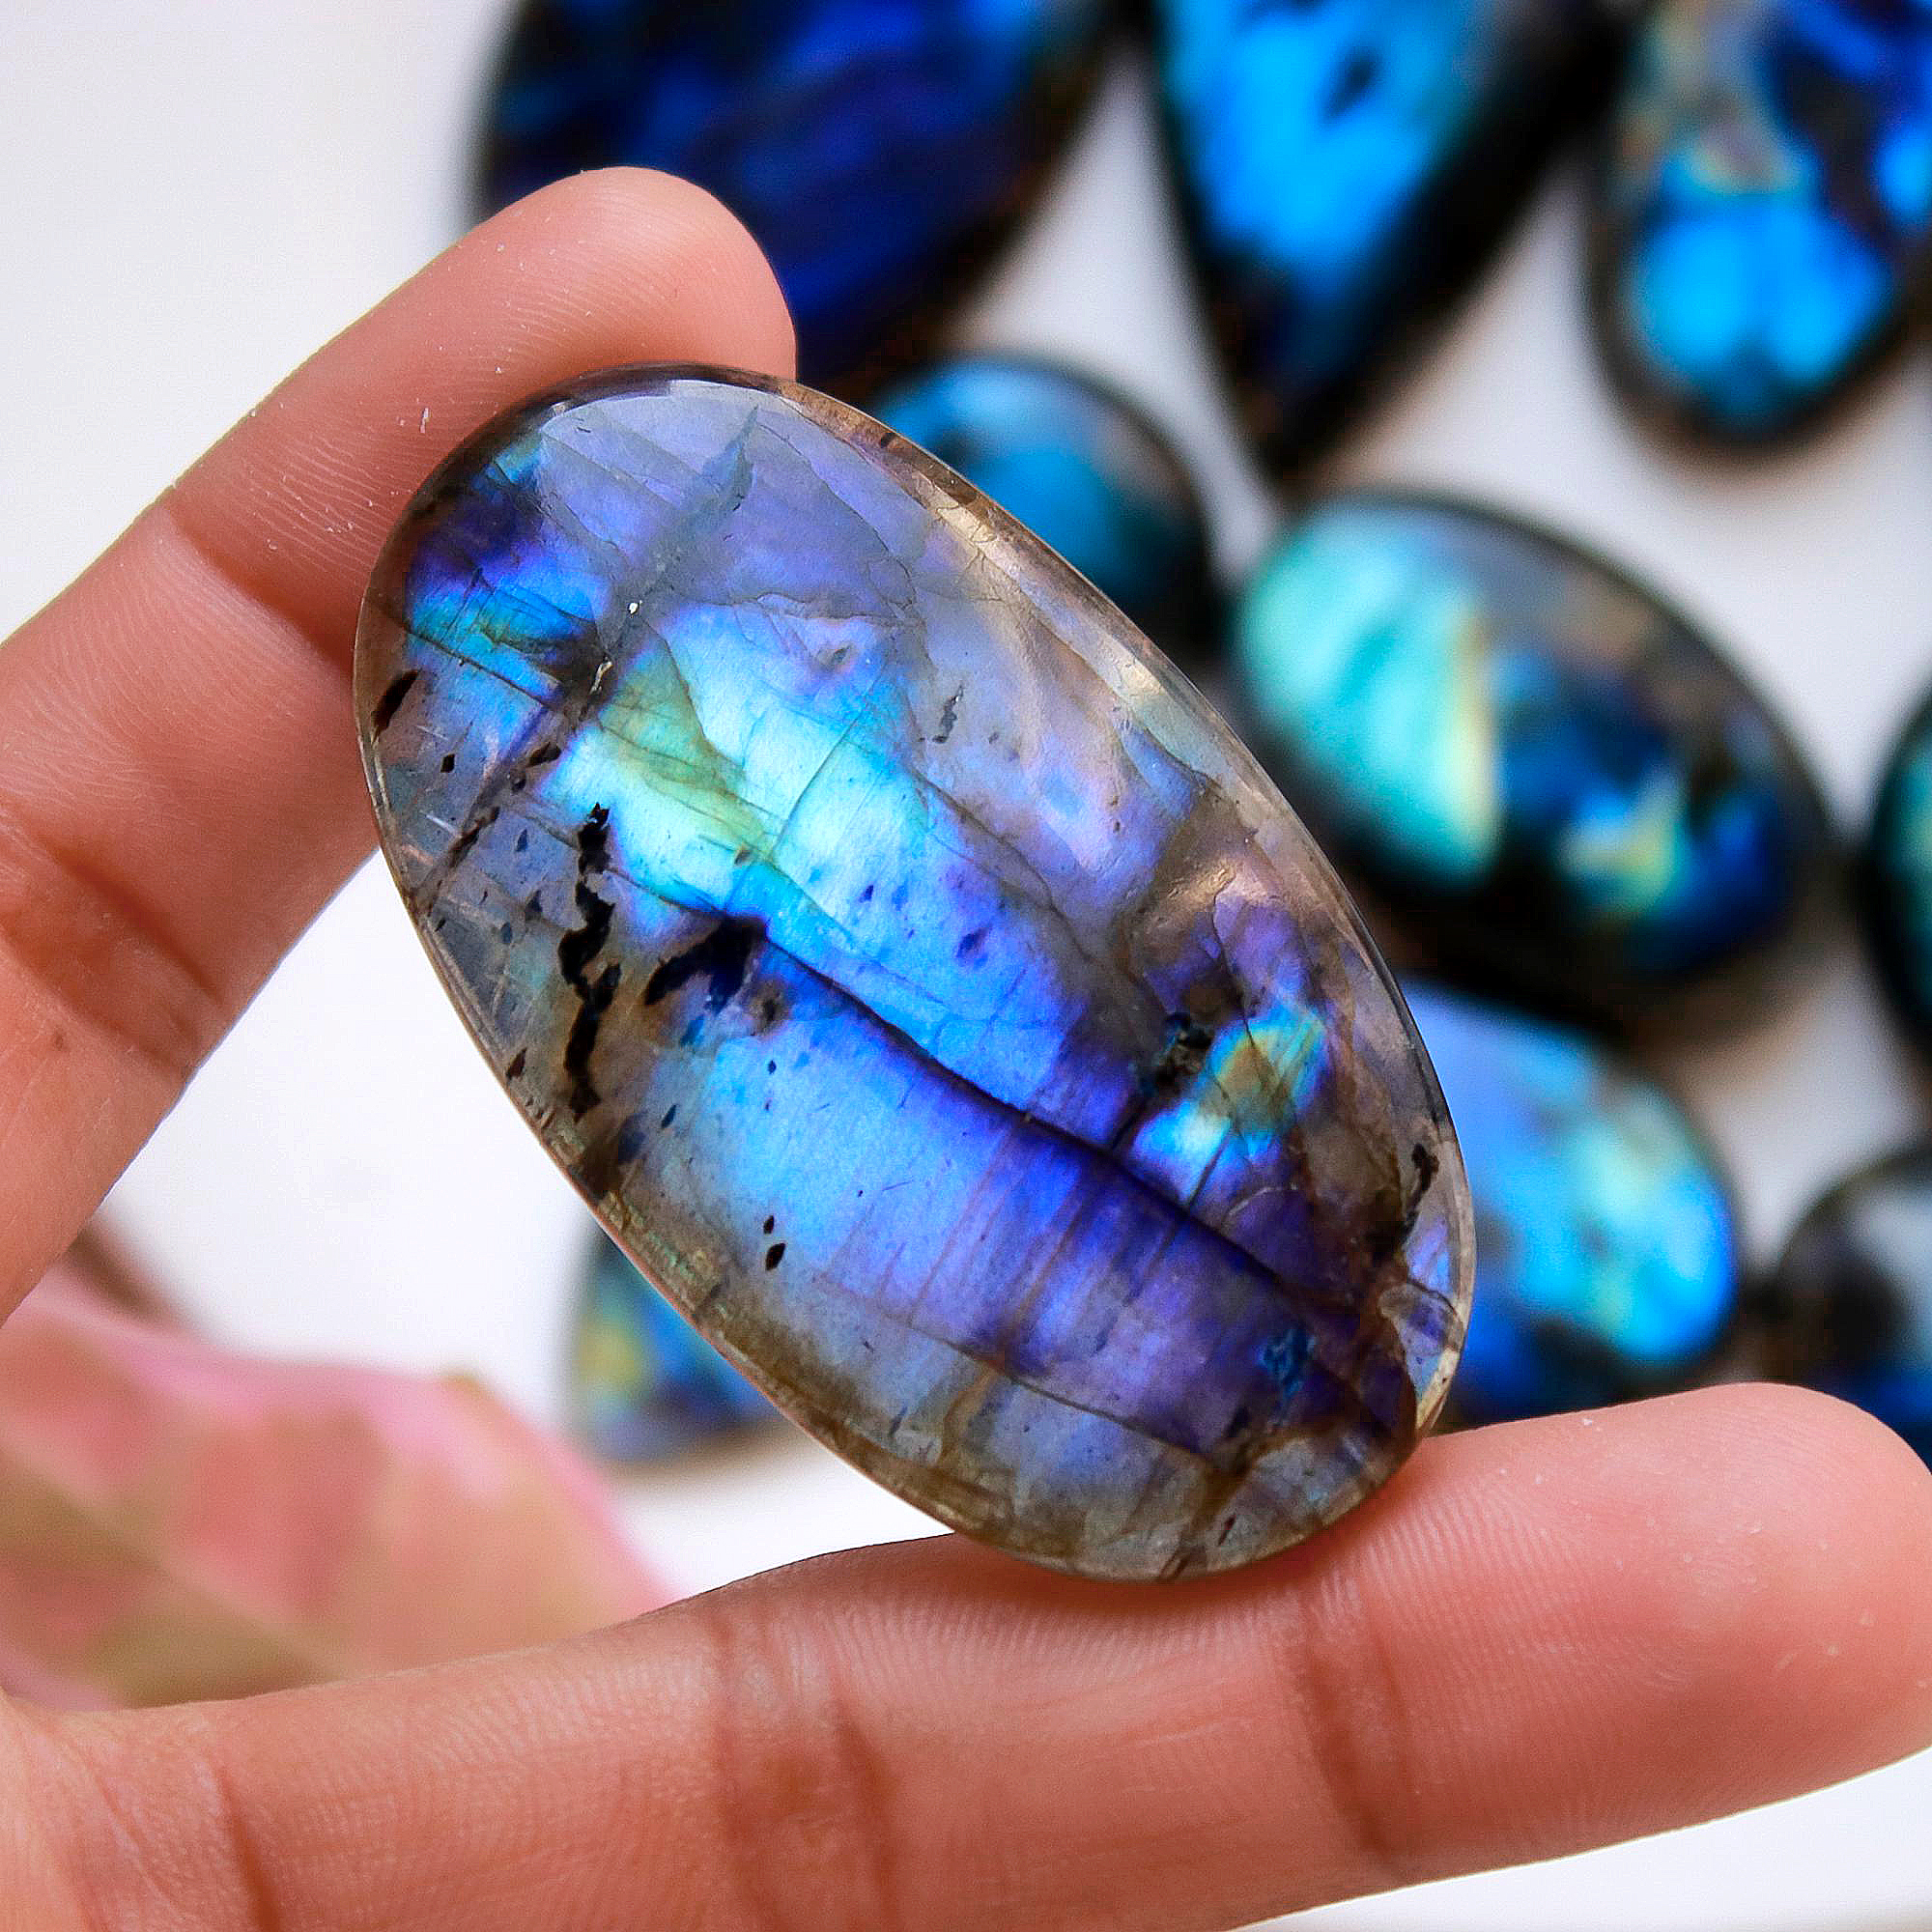 13 Pcs.750 Cts Natural labradorite Cabochon Loose Gemstone For Jewelry Wholesale Lot Size 55x31 33x25mm